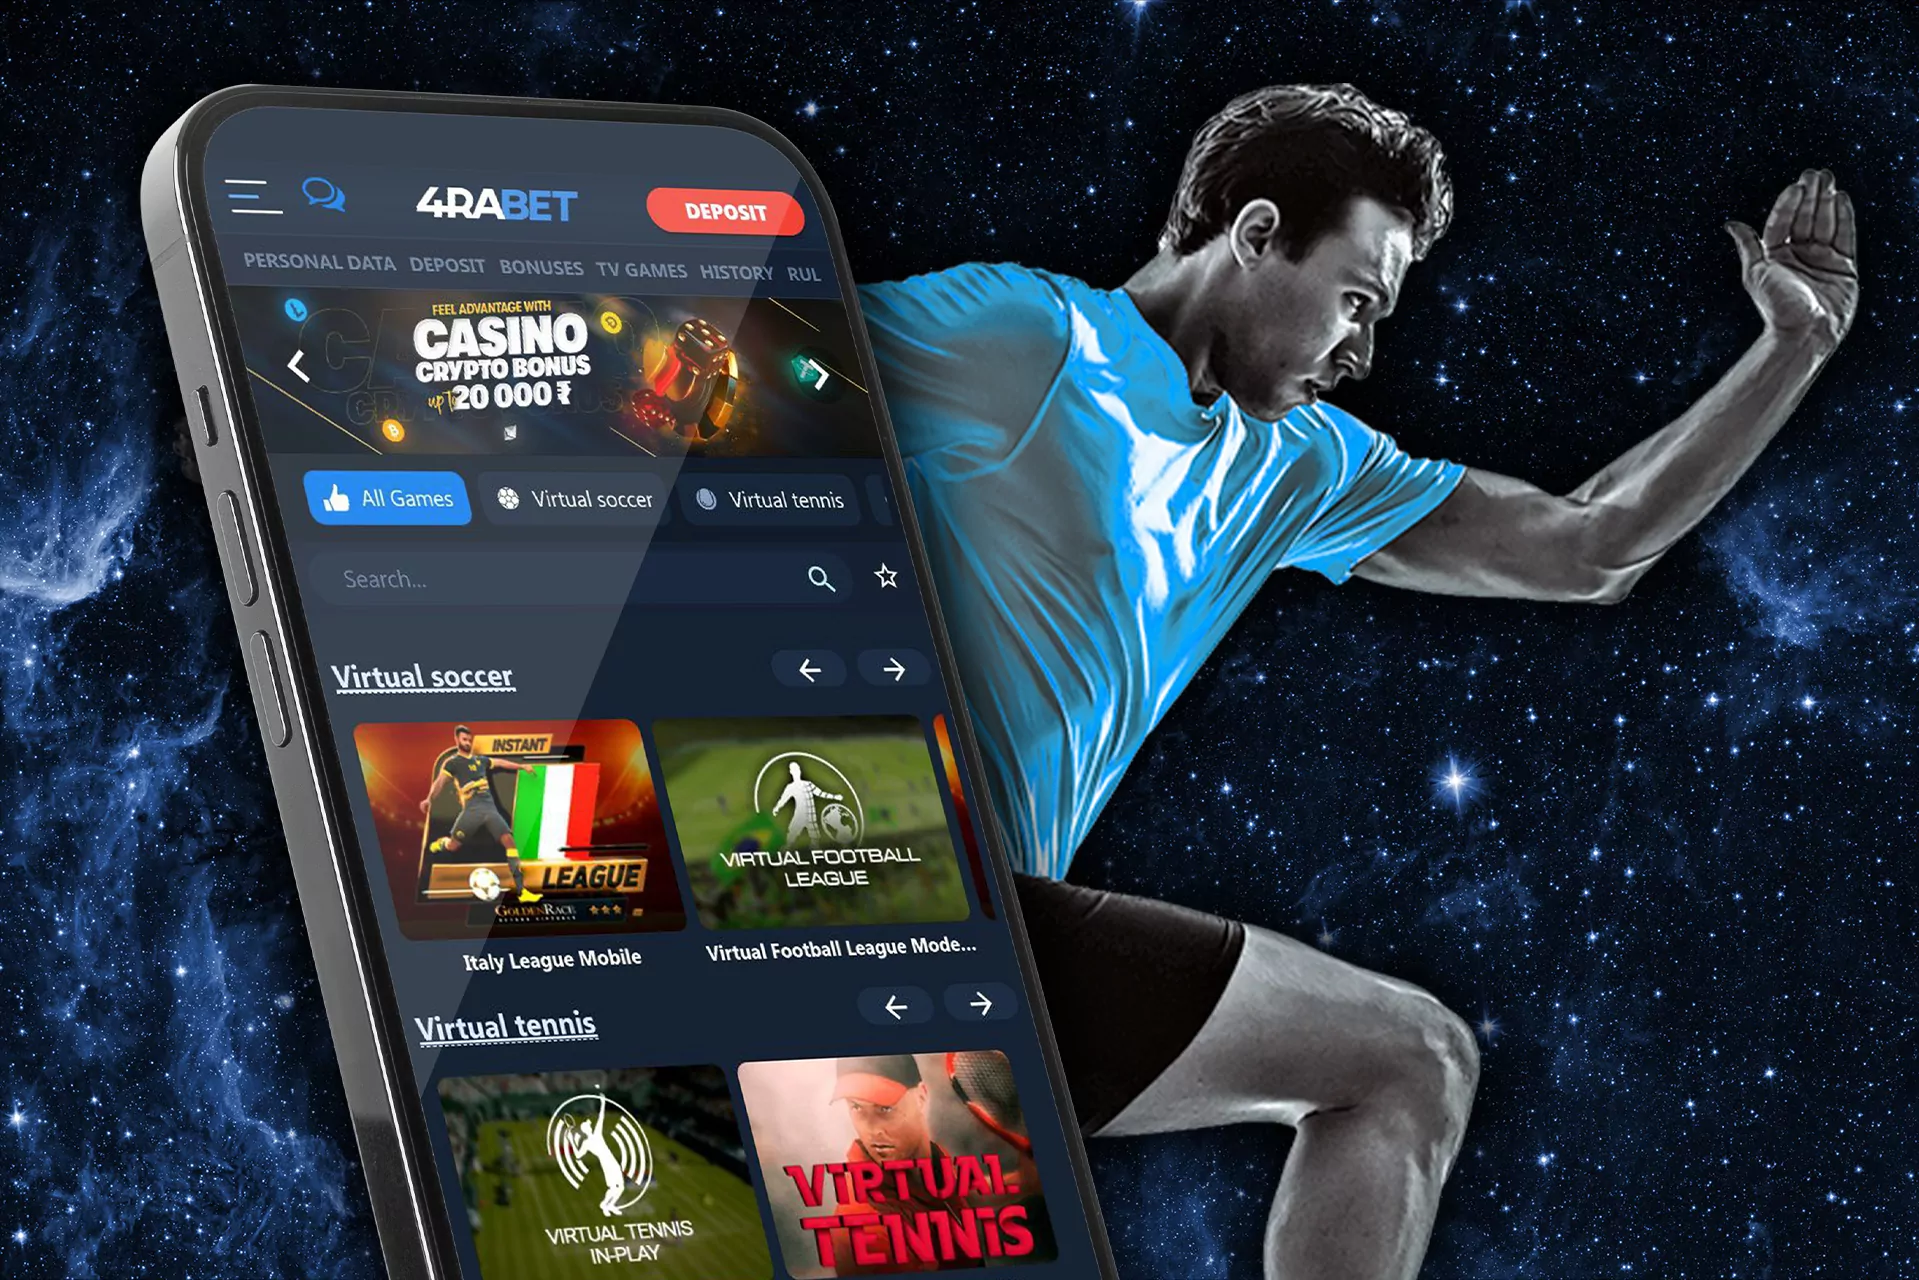 Virtual football, hockey and basketball are available for betting in the 4rabet sportsbook.